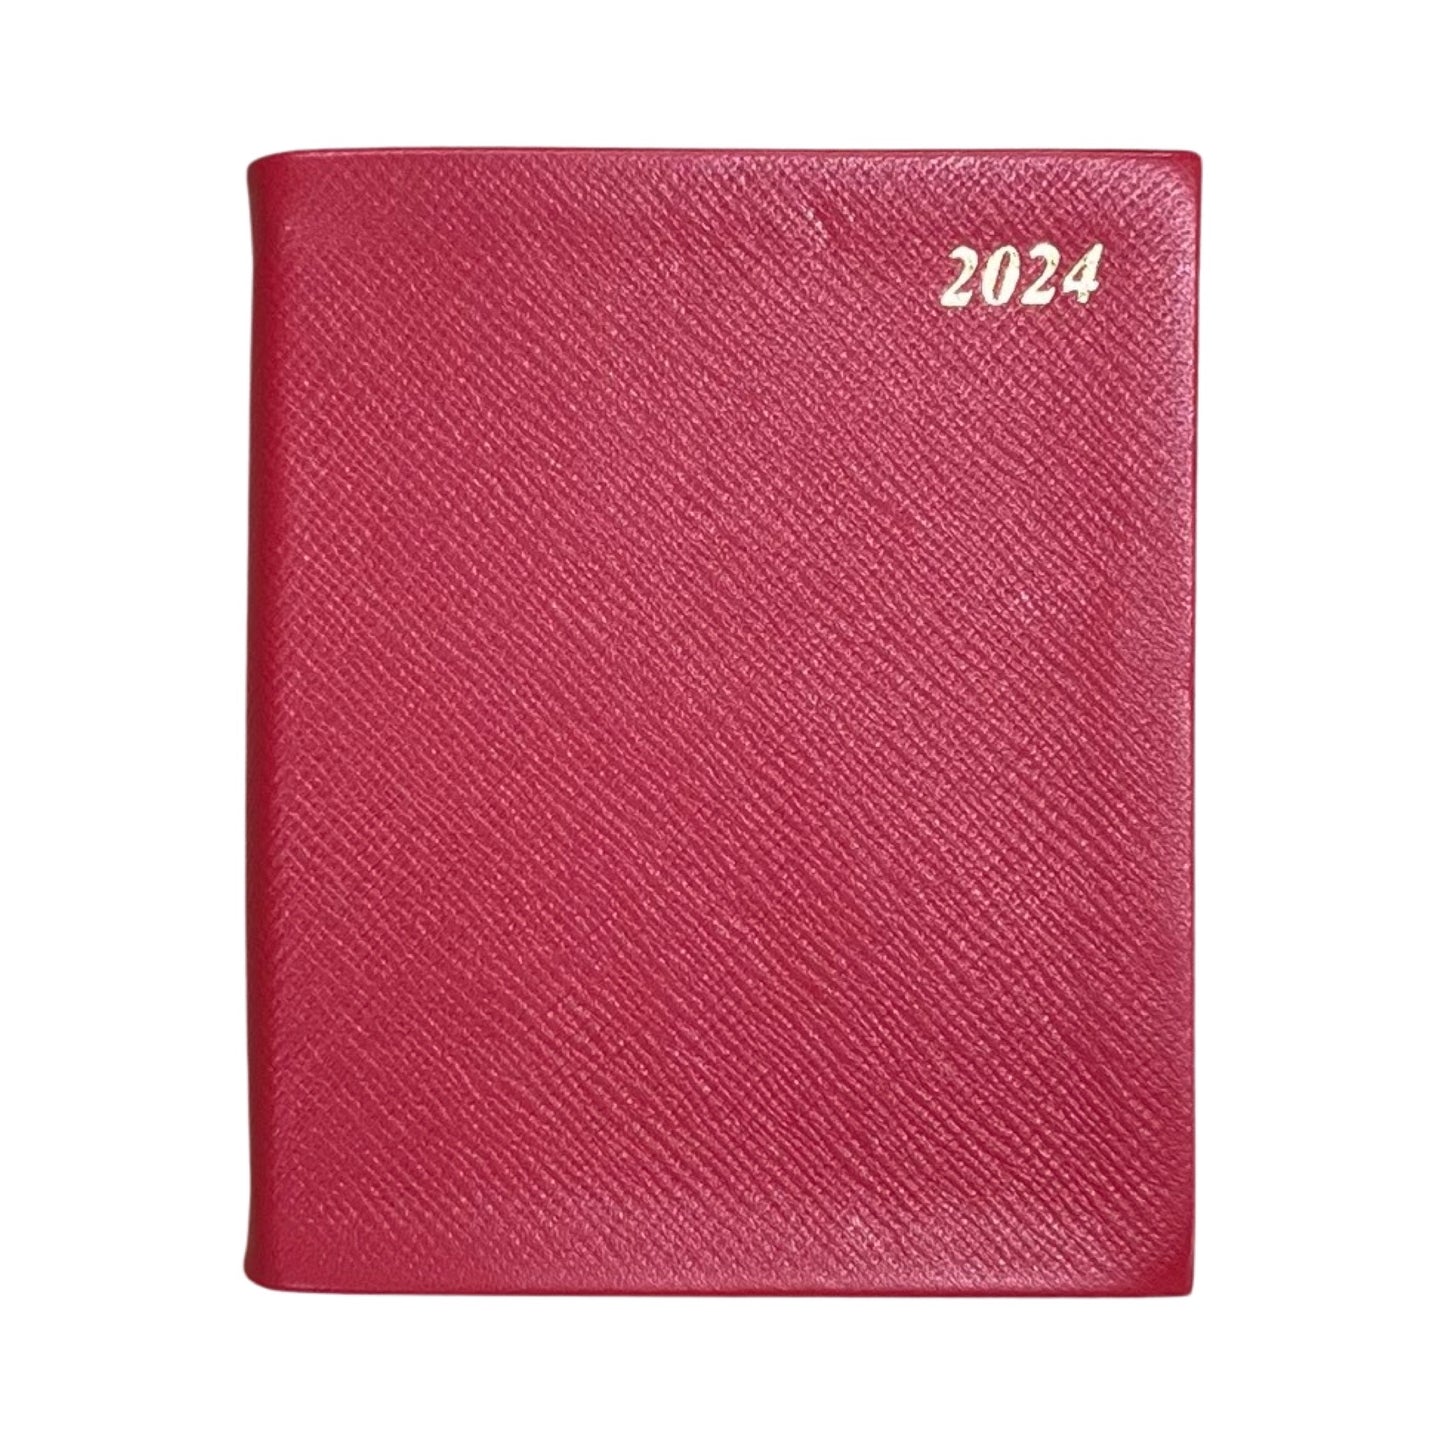 2024 CROSSGRAIN Leather Pocket Calendar Book | 5 x 4" | Thick, One Day Per Page | D164L